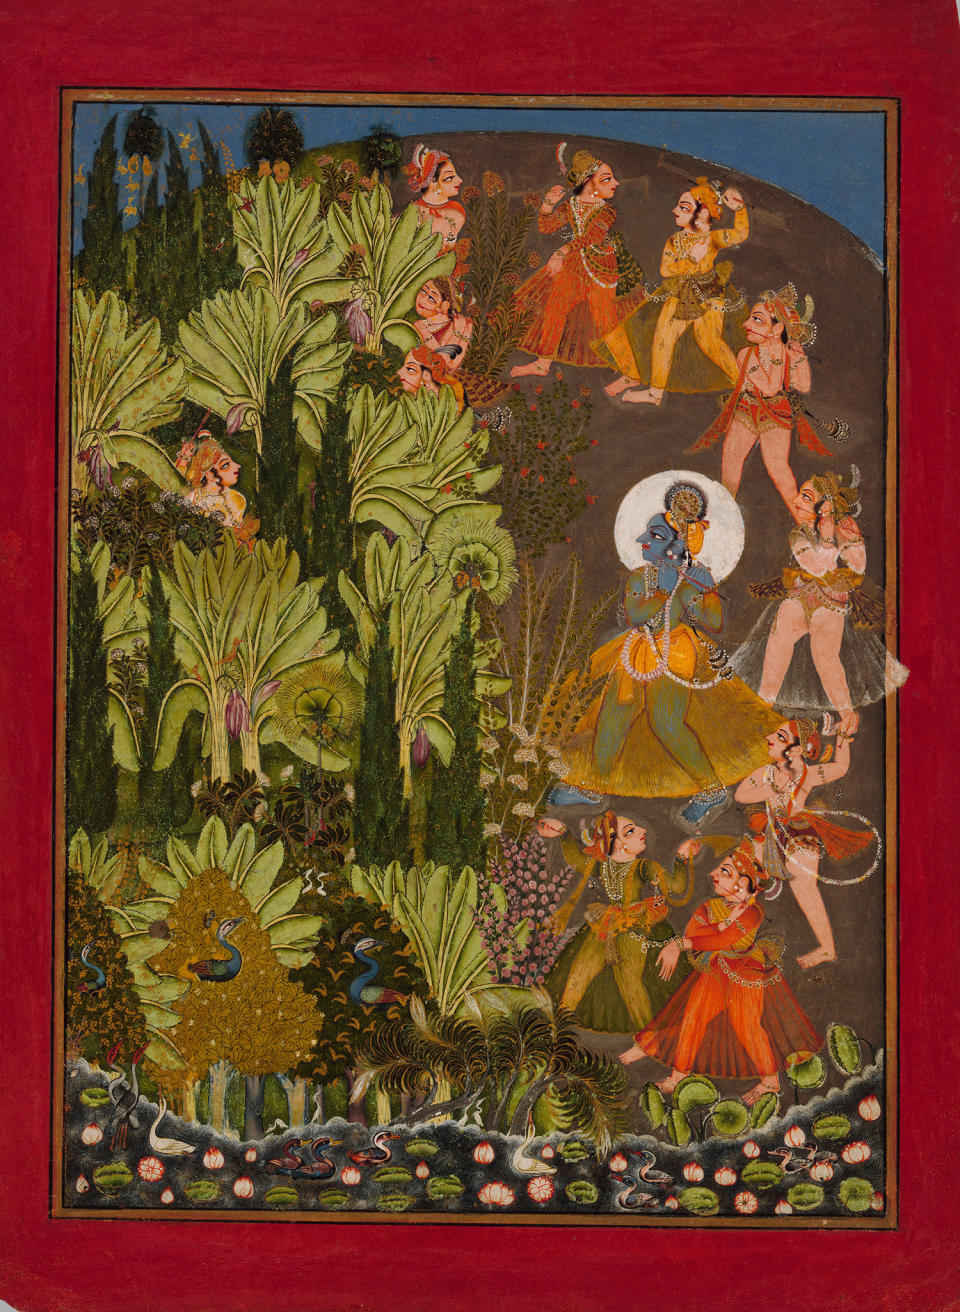 "A&nbsp;Krishna and the Gopas (Cow Herders) Enter the&nbsp;Forest,"<strong>&nbsp;</strong>Possibly by Kota Master.&nbsp;Rajasthan, kingdom of Kota, ca. 1720,&nbsp;Opaque watercolor and gold on paper; red border with&nbsp;black-lined gold inner rule; painting 10 1/2 x 7 3/4 in.&nbsp;Promised Gift of the Kronos Collections, 2015.